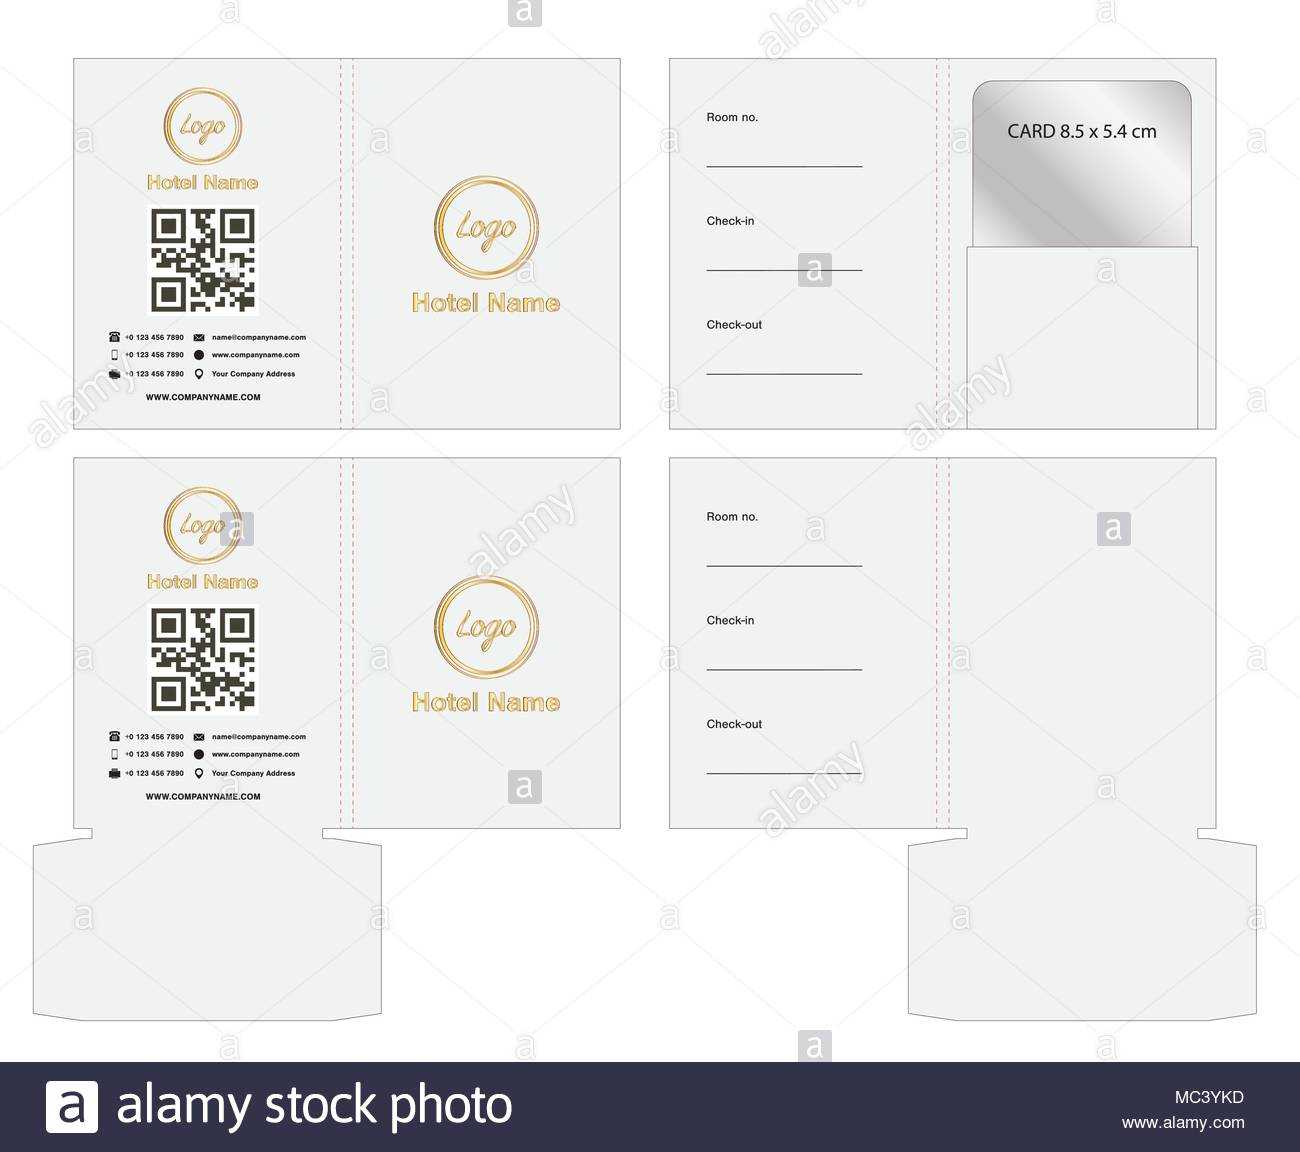 Key Card Envelope Die Cut Template Mock Up Illustration Within Hotel Key Card Template